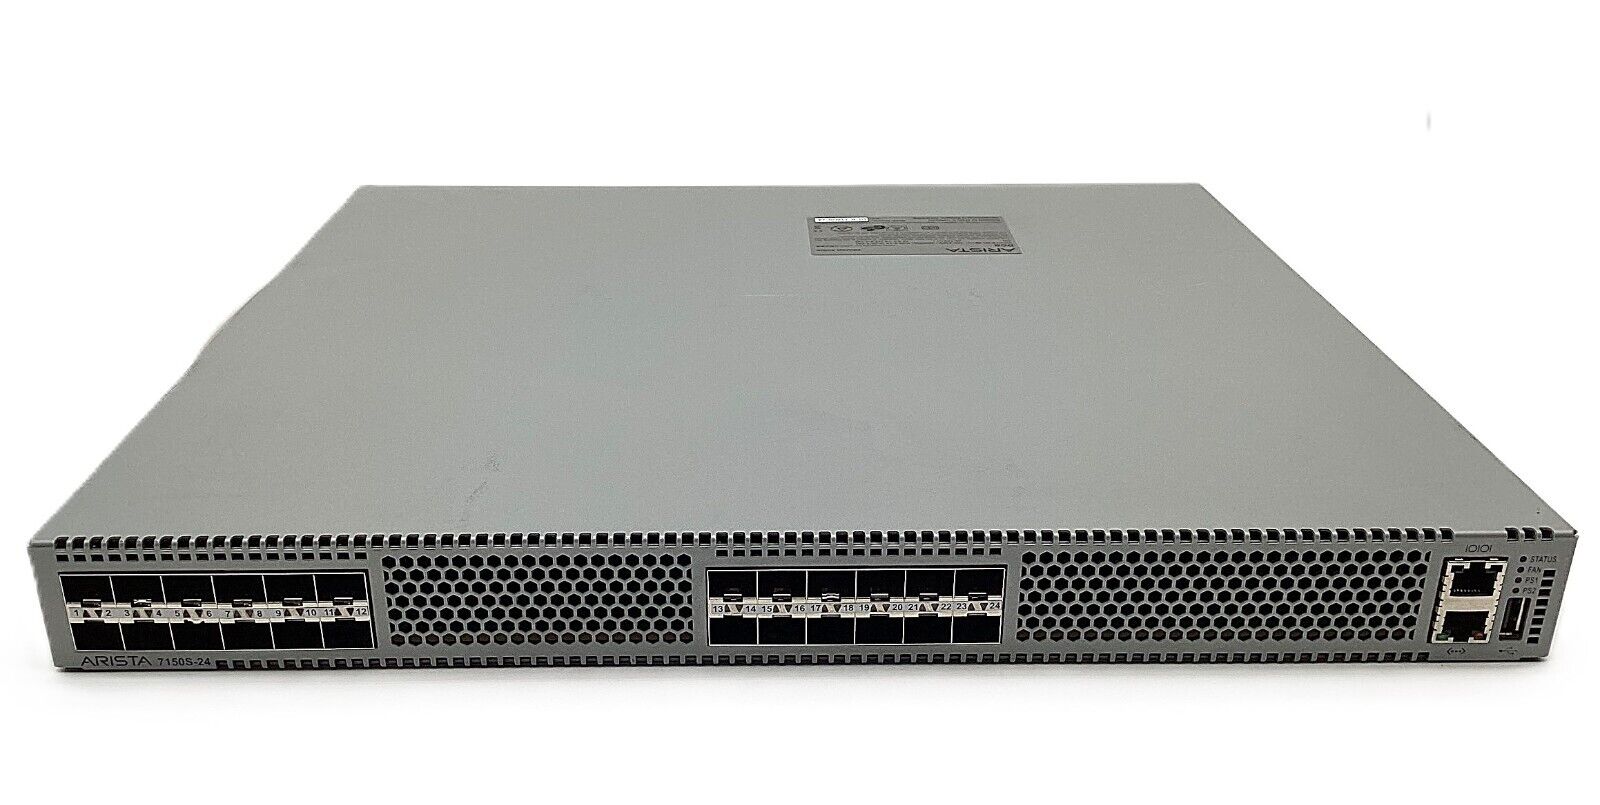 Arista DCS-7150S-24-R 24-Port 1/10G SFP+ Rear to Front Flow